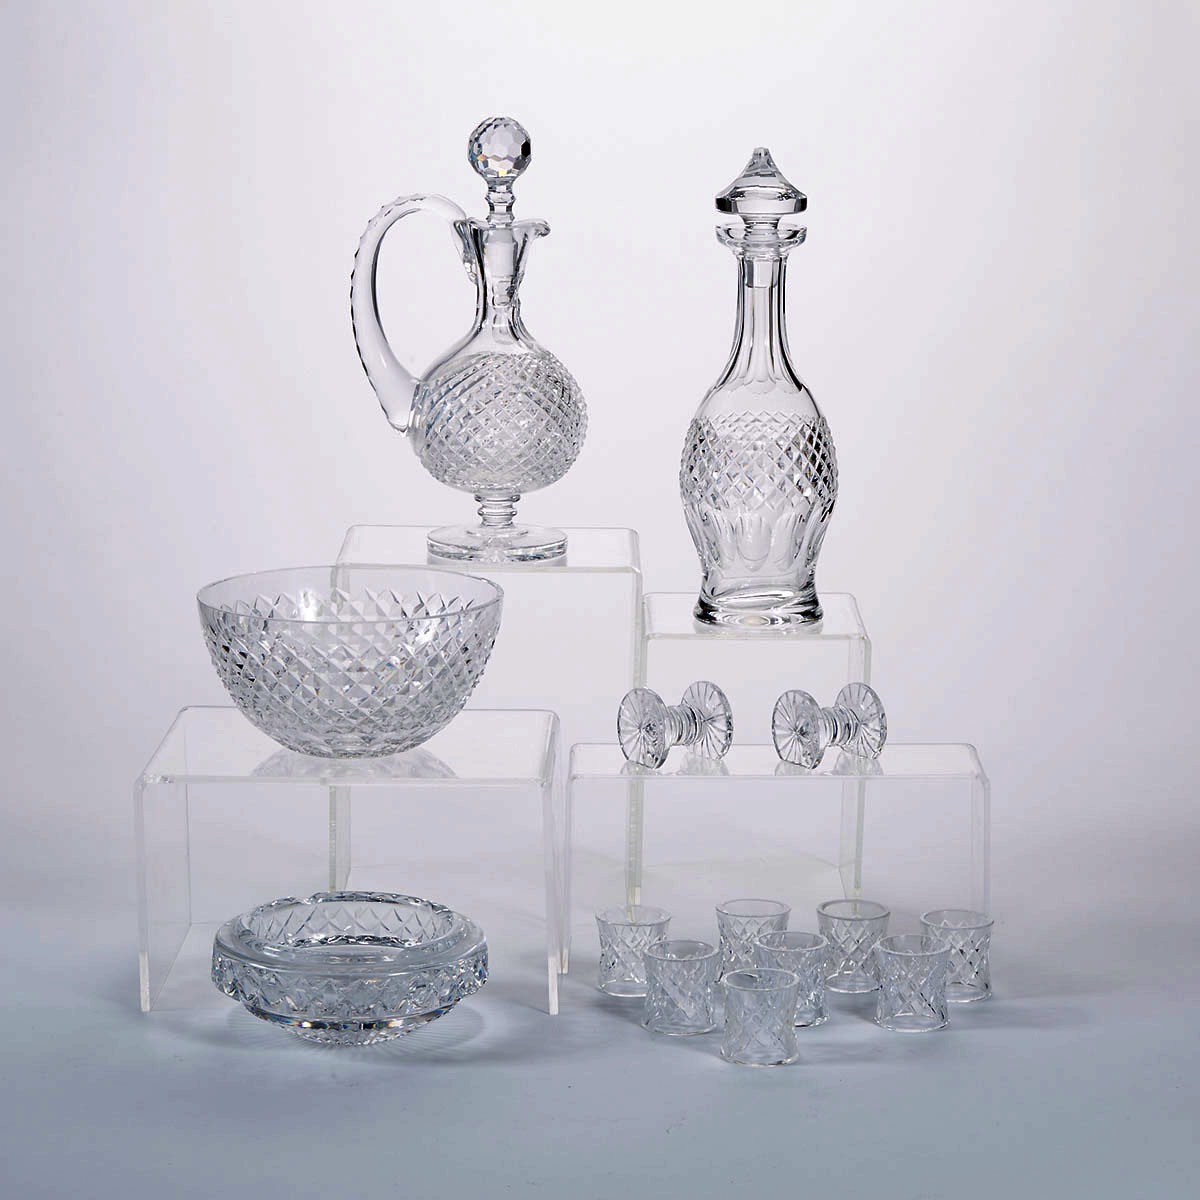 Group of Waterford Cut Glass, 20th century